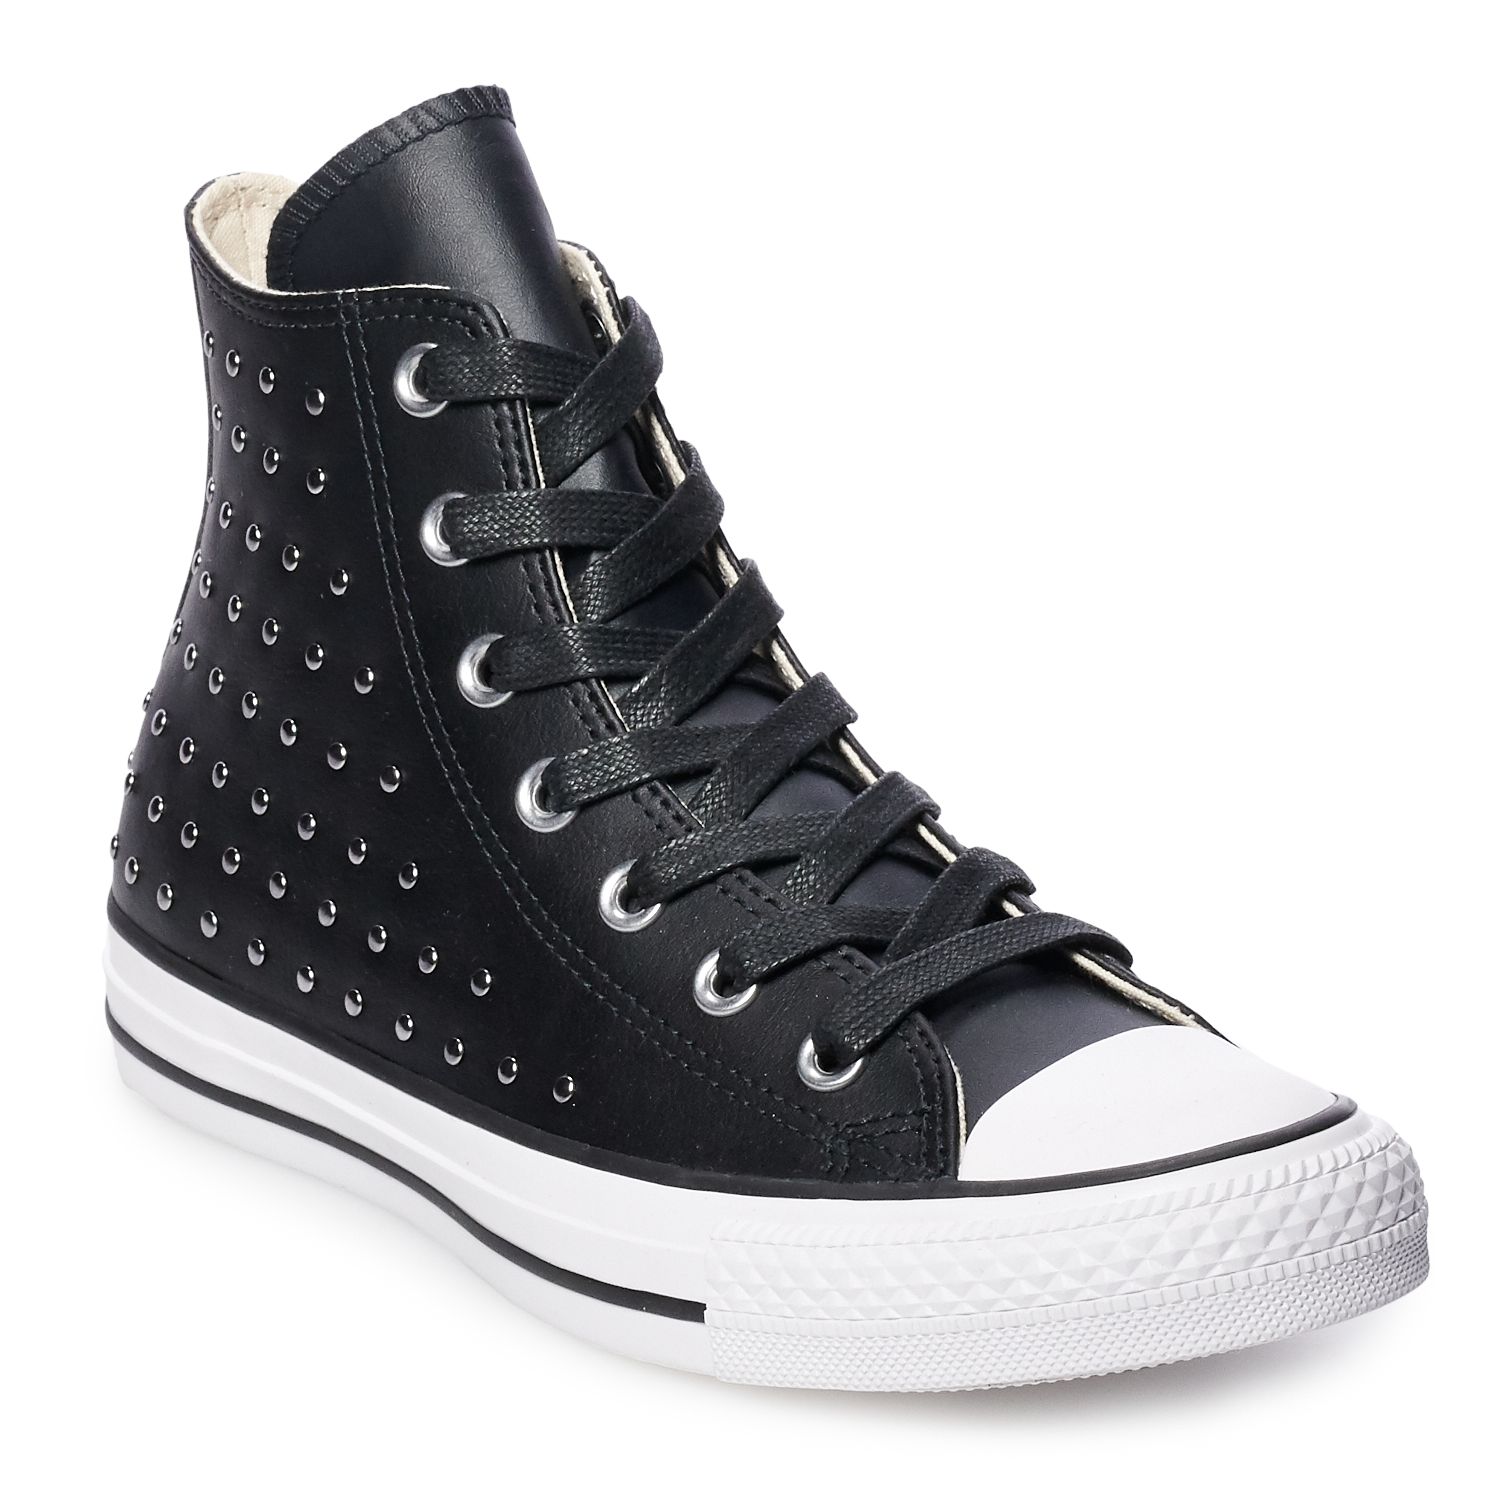 Women's Converse Chuck Taylor All Star Leather High Top Shoes